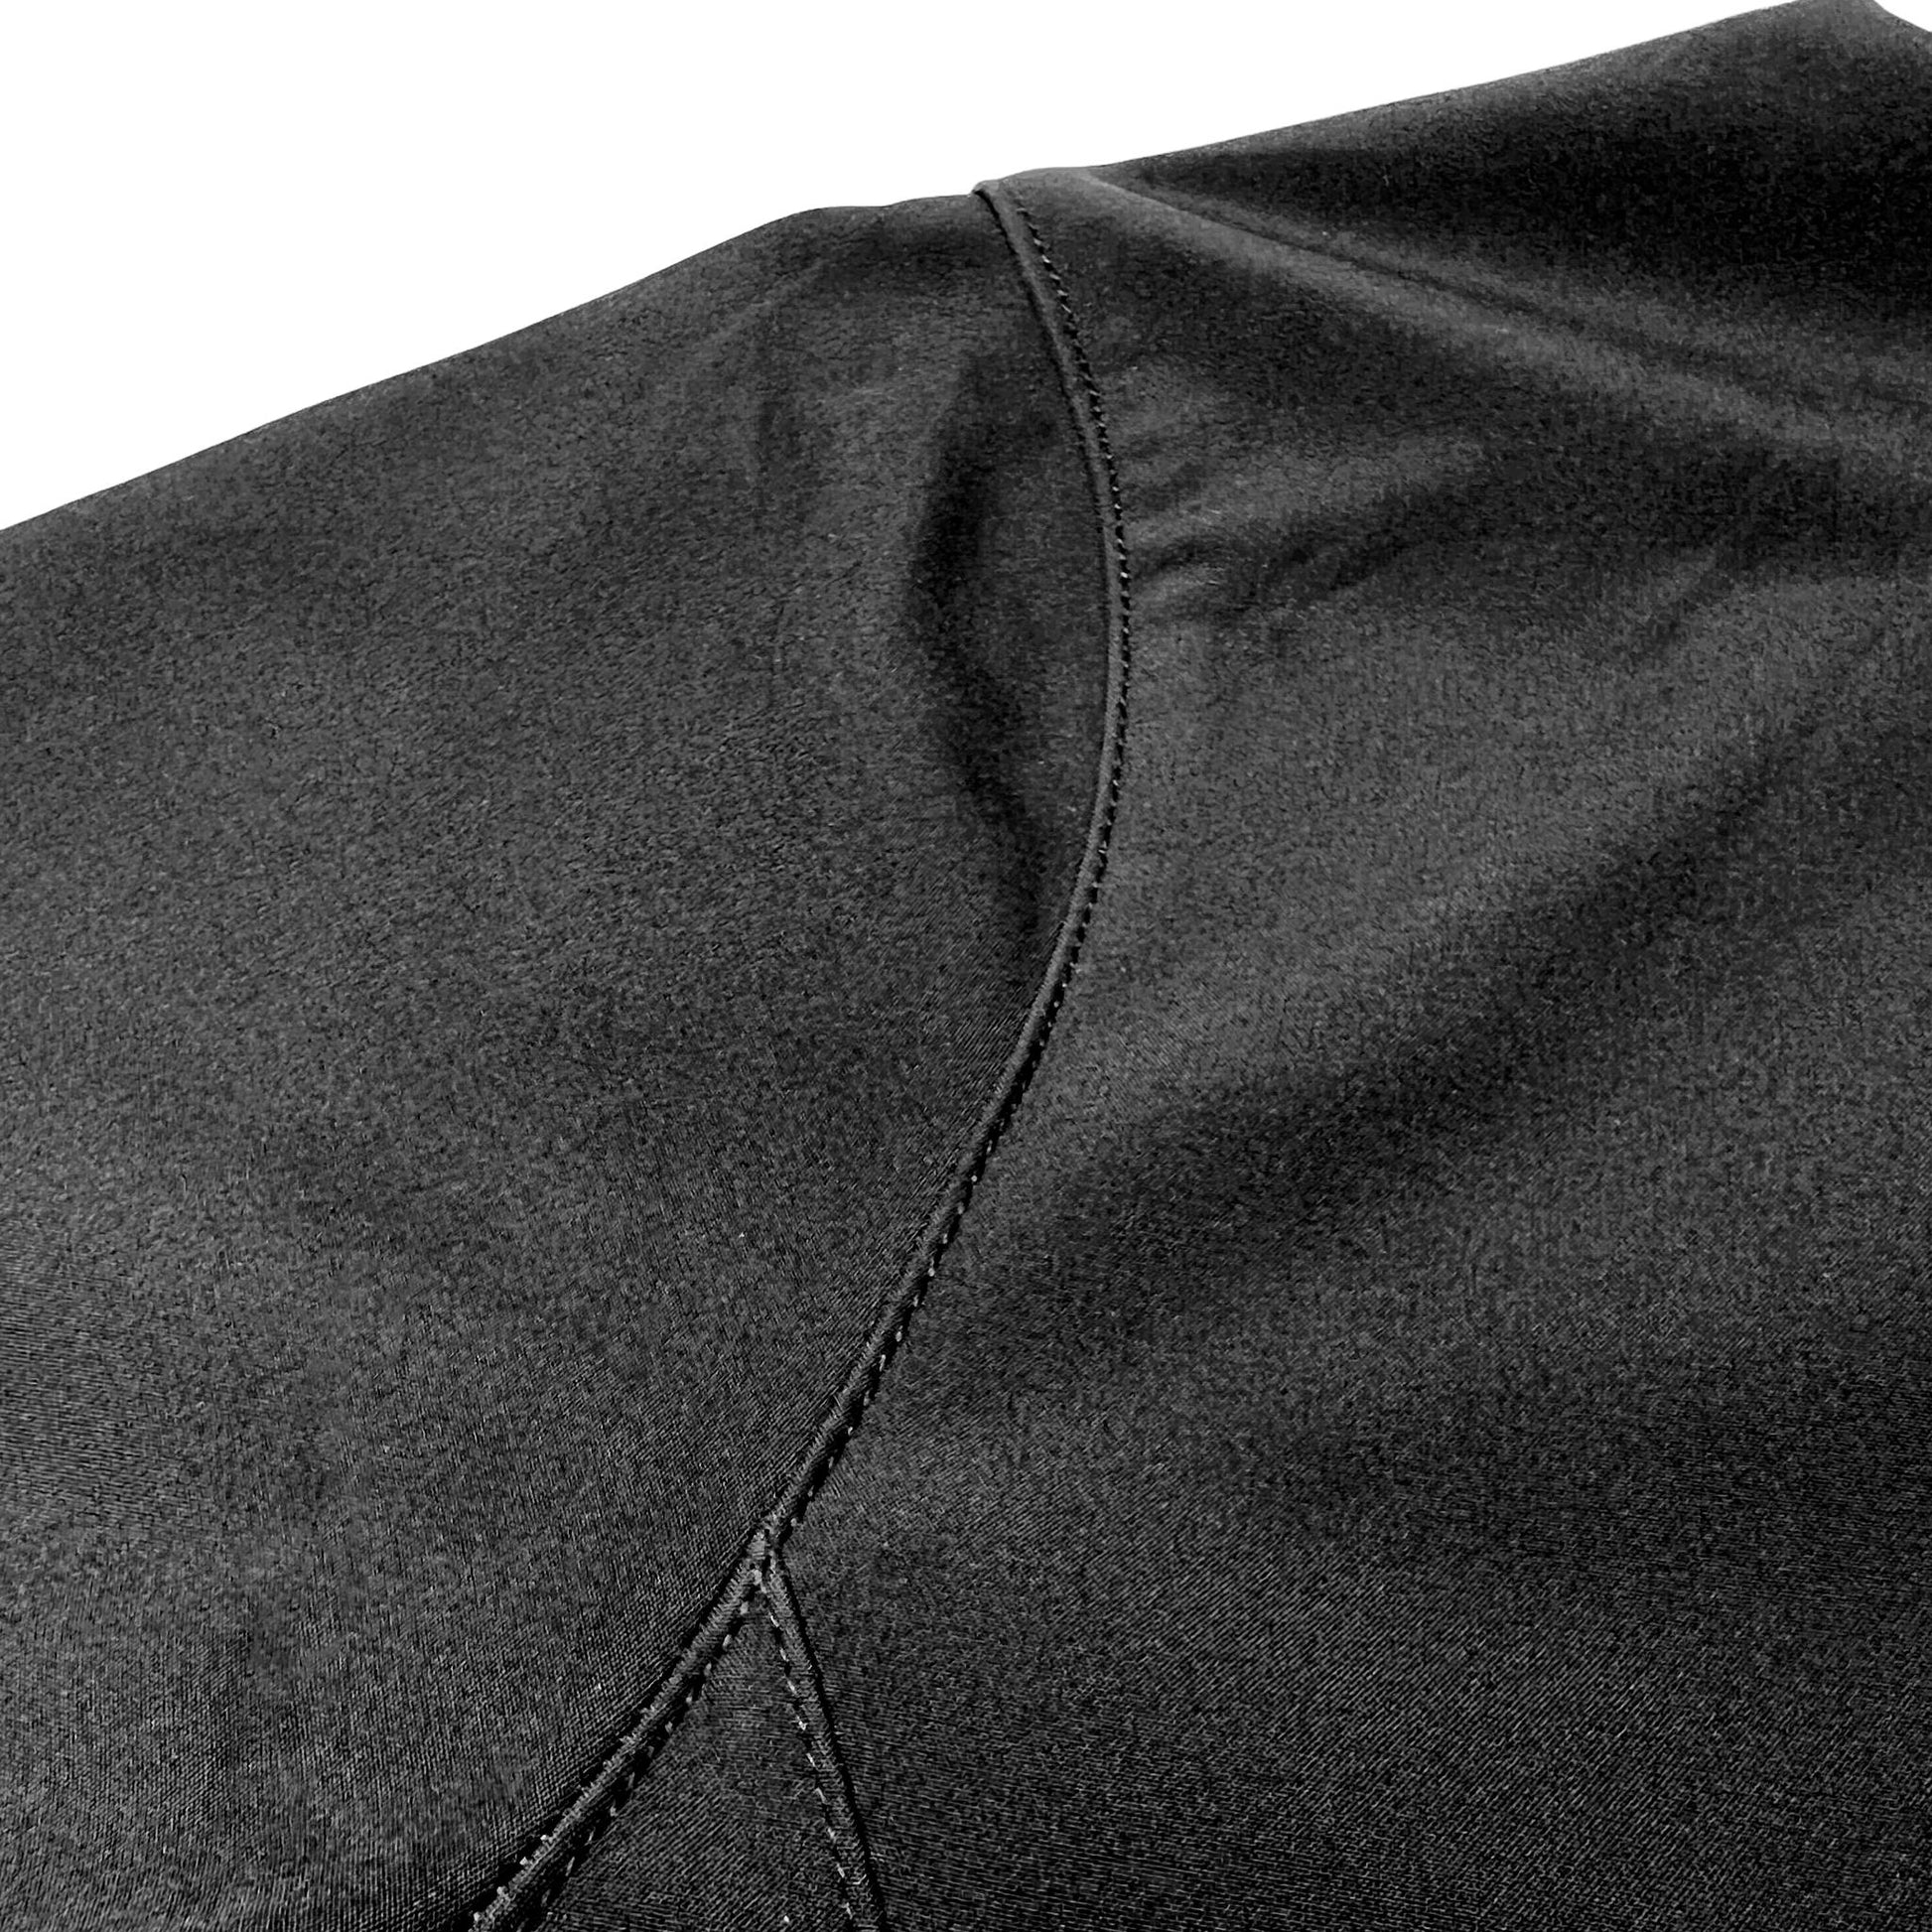 [POLICE] Soft Shell Jacket [BLK/GRY]-13 Fifty Apparel